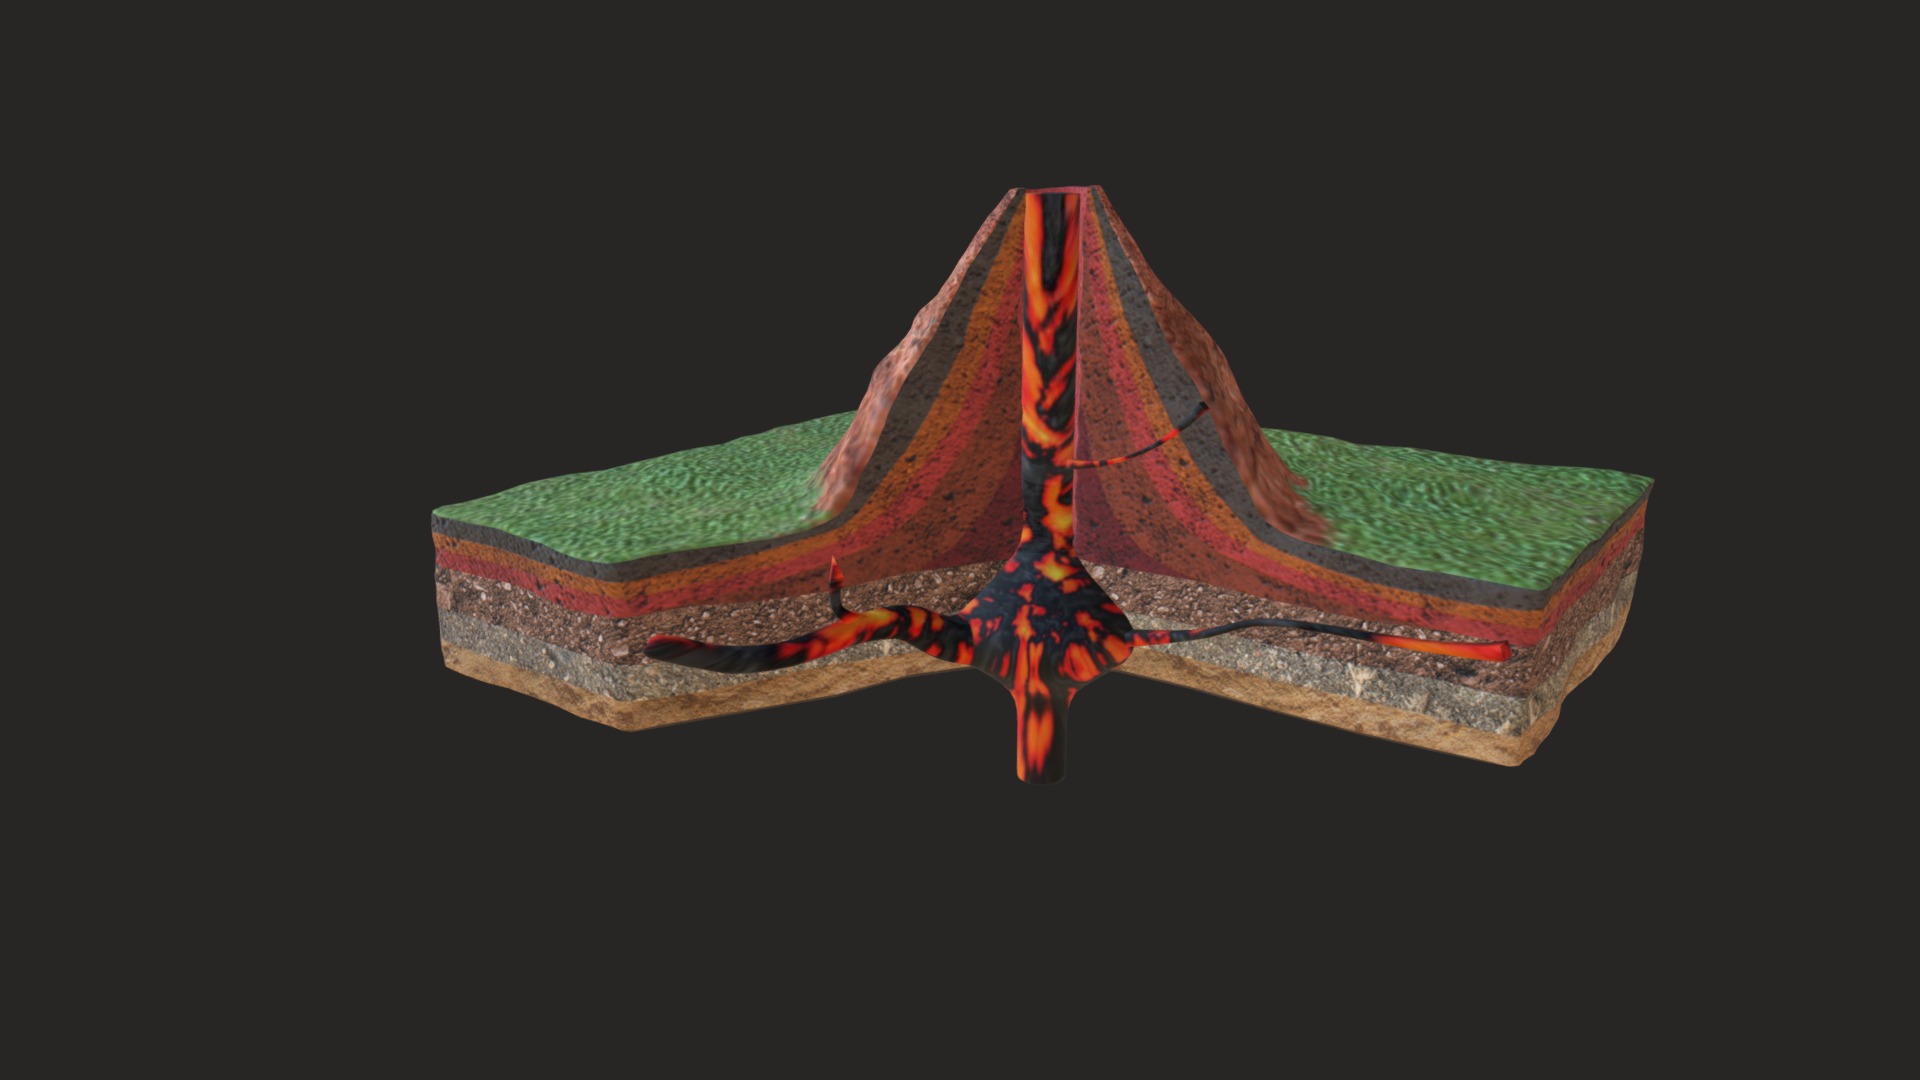 3D model Volcano – البركان - This is a 3D model of the Volcano - البركان. The 3D model is about a colorful hat with a bow.